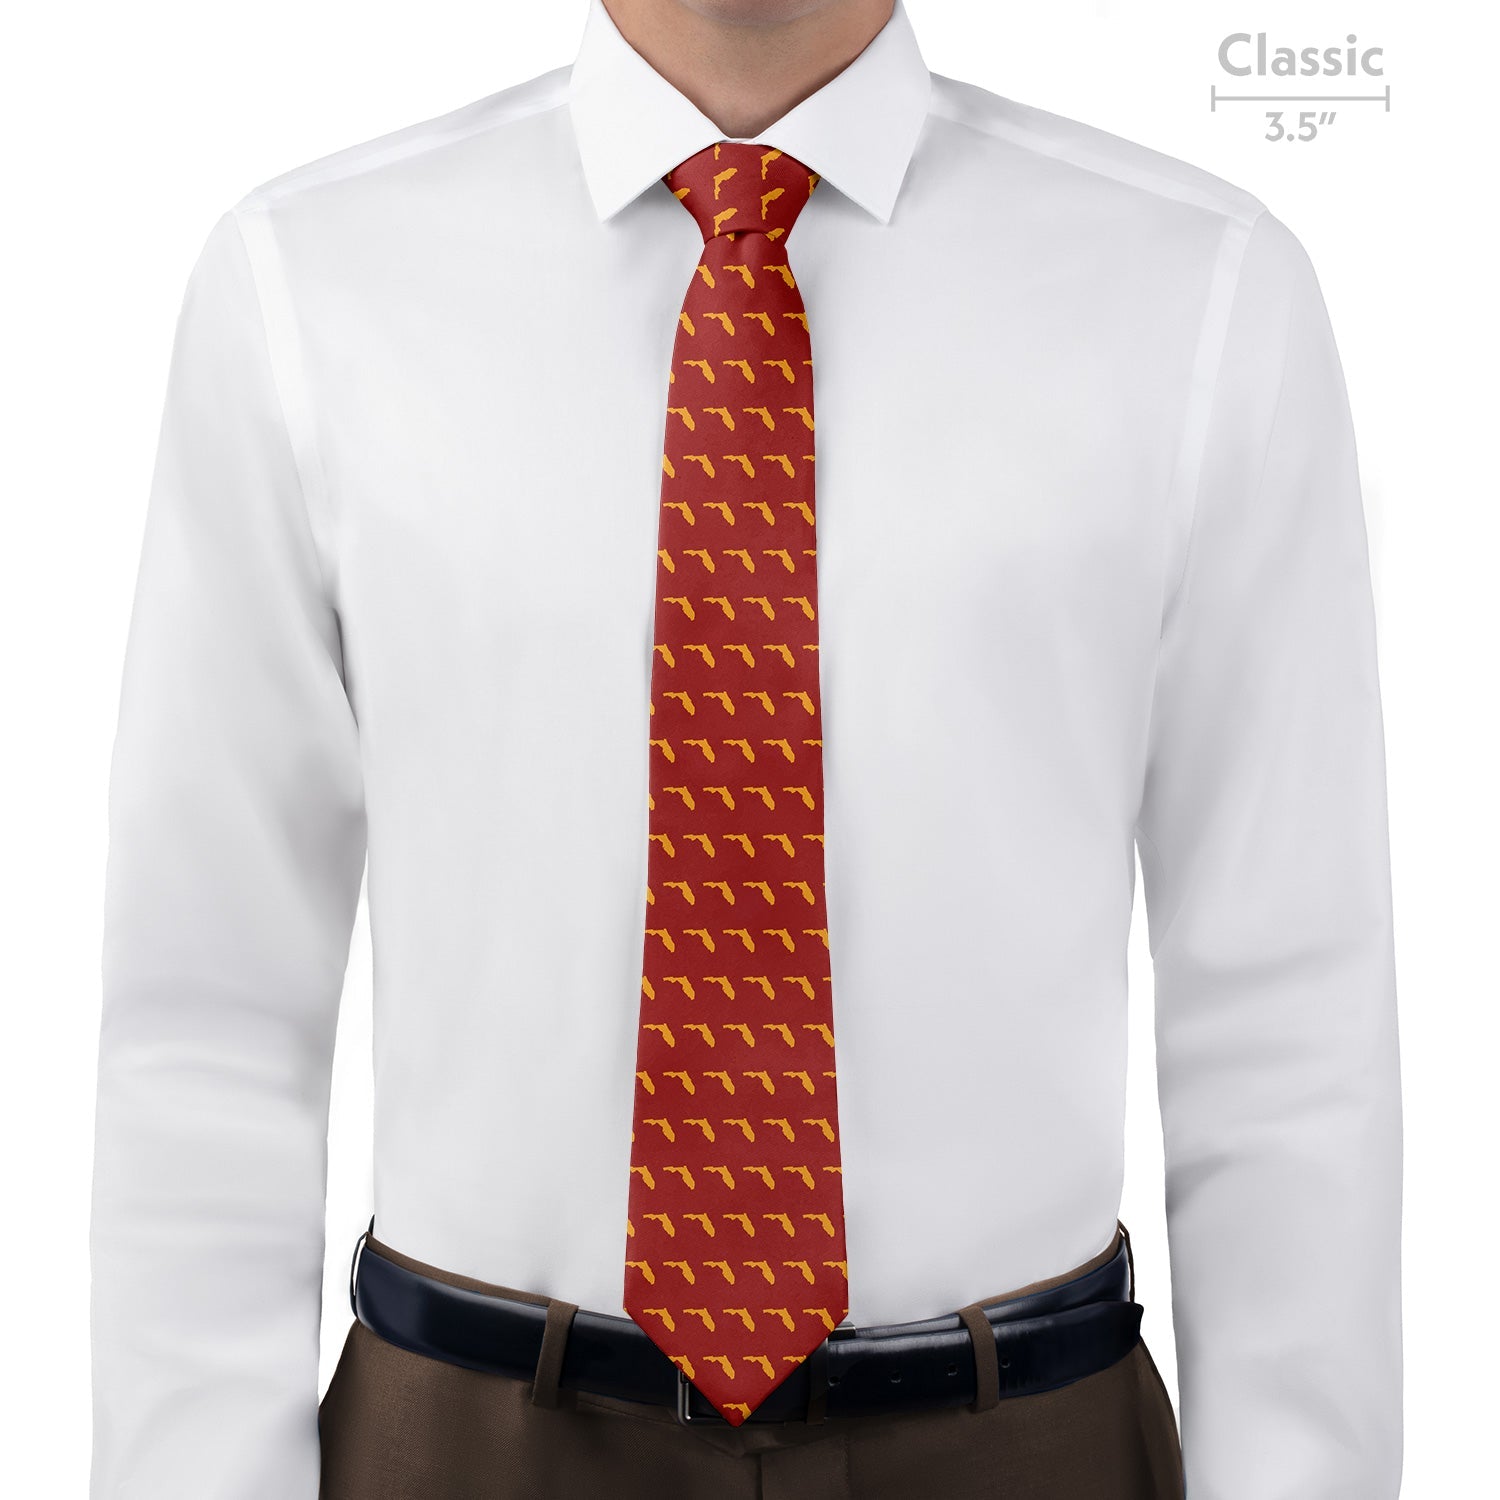 Florida State Outline Necktie - Classic - Knotty Tie Co.